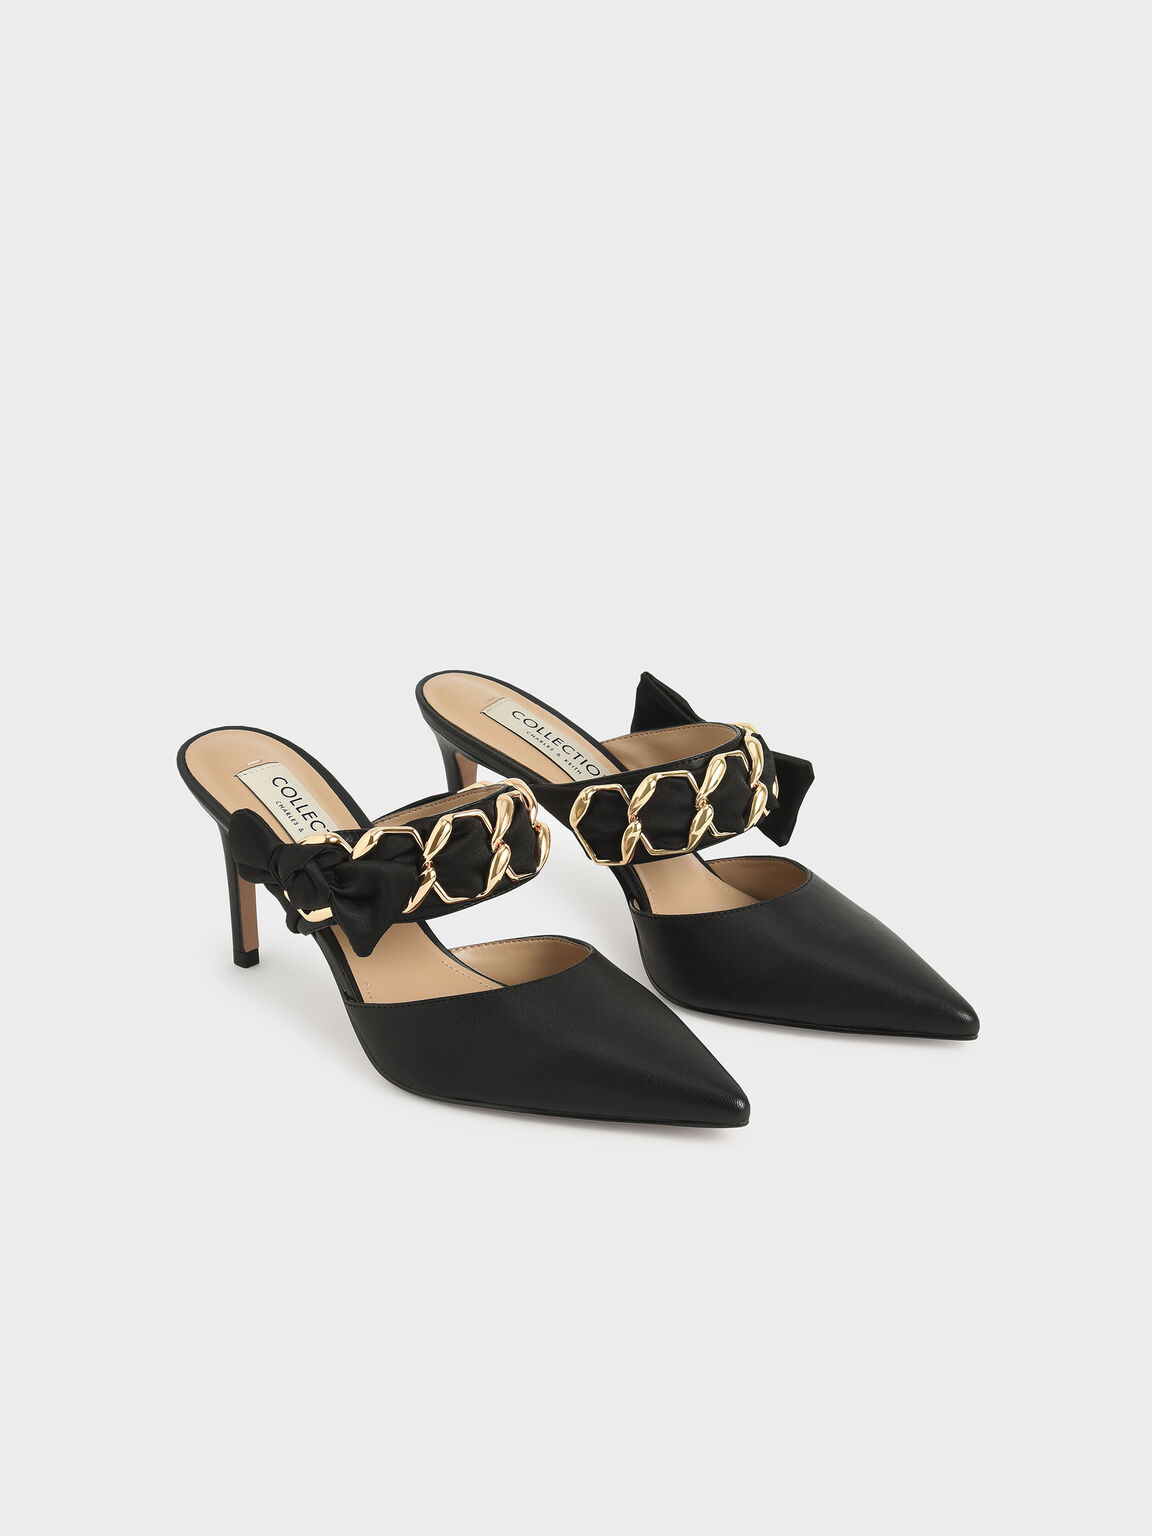 Black Satin Bow Leather Mules - CHARLES & KEITH SG